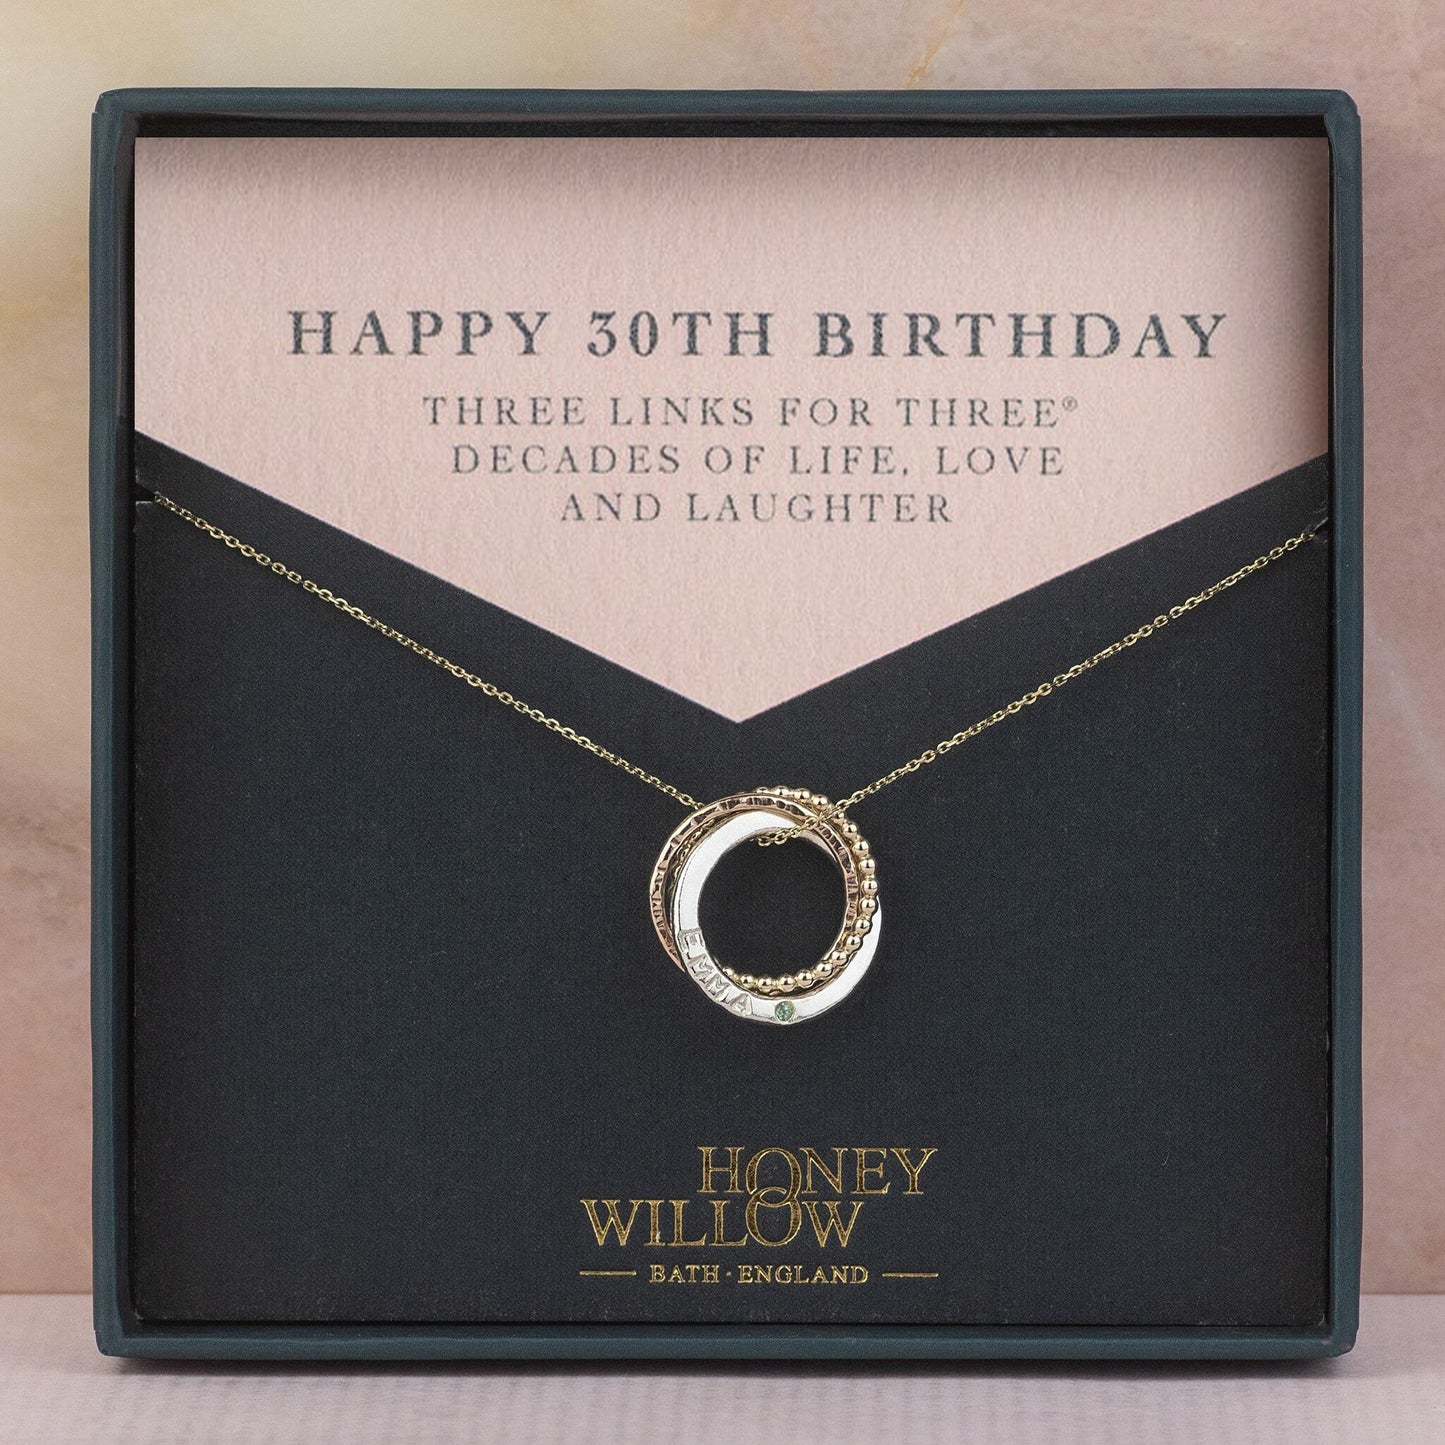 Personalised 30th Birthday Birthstone Necklace - Recycled 9kt Gold & Silver - 3 Links for 3 Decades